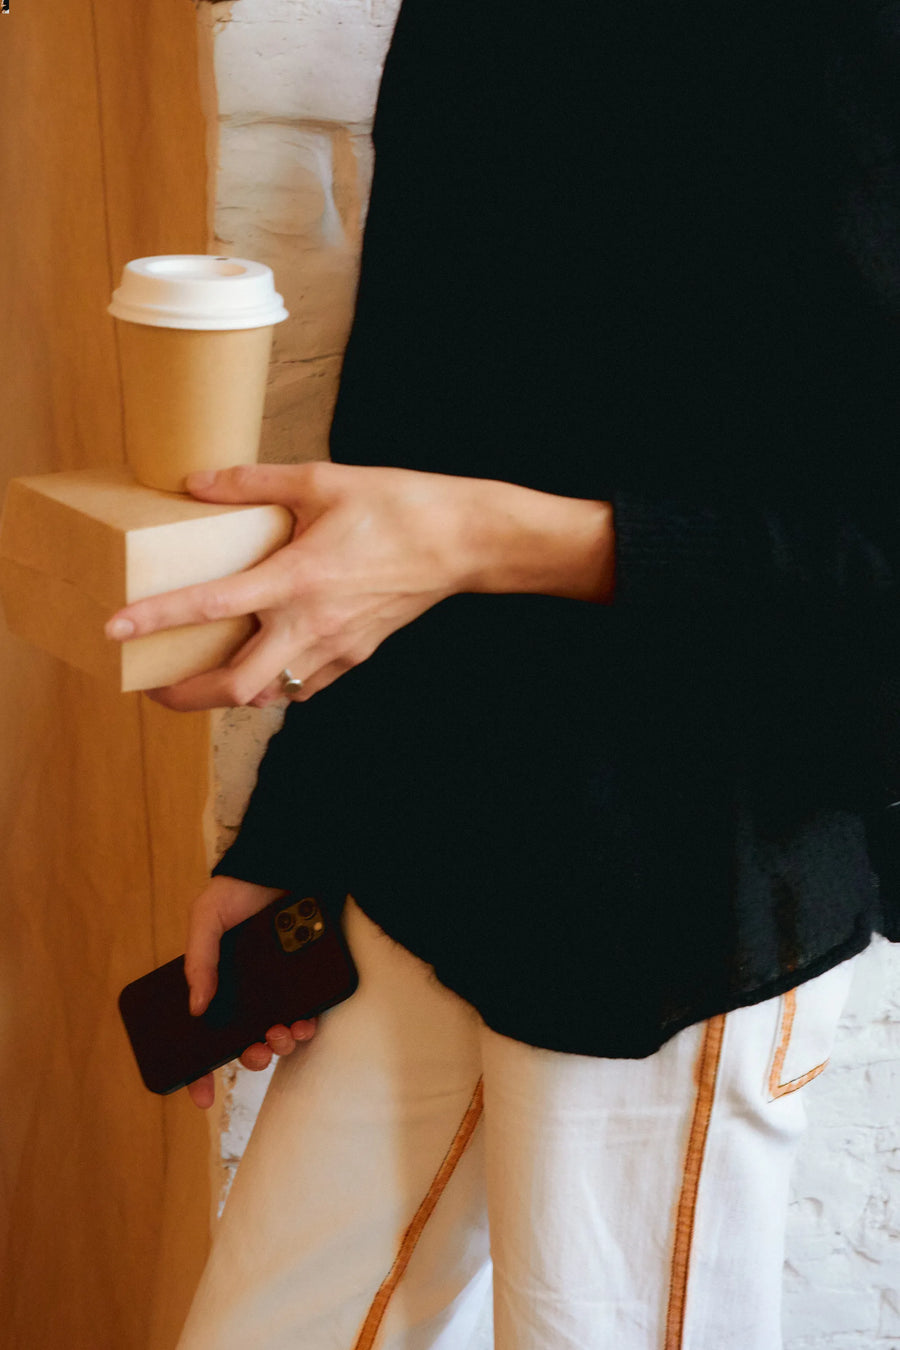 Woman holding coffee cup